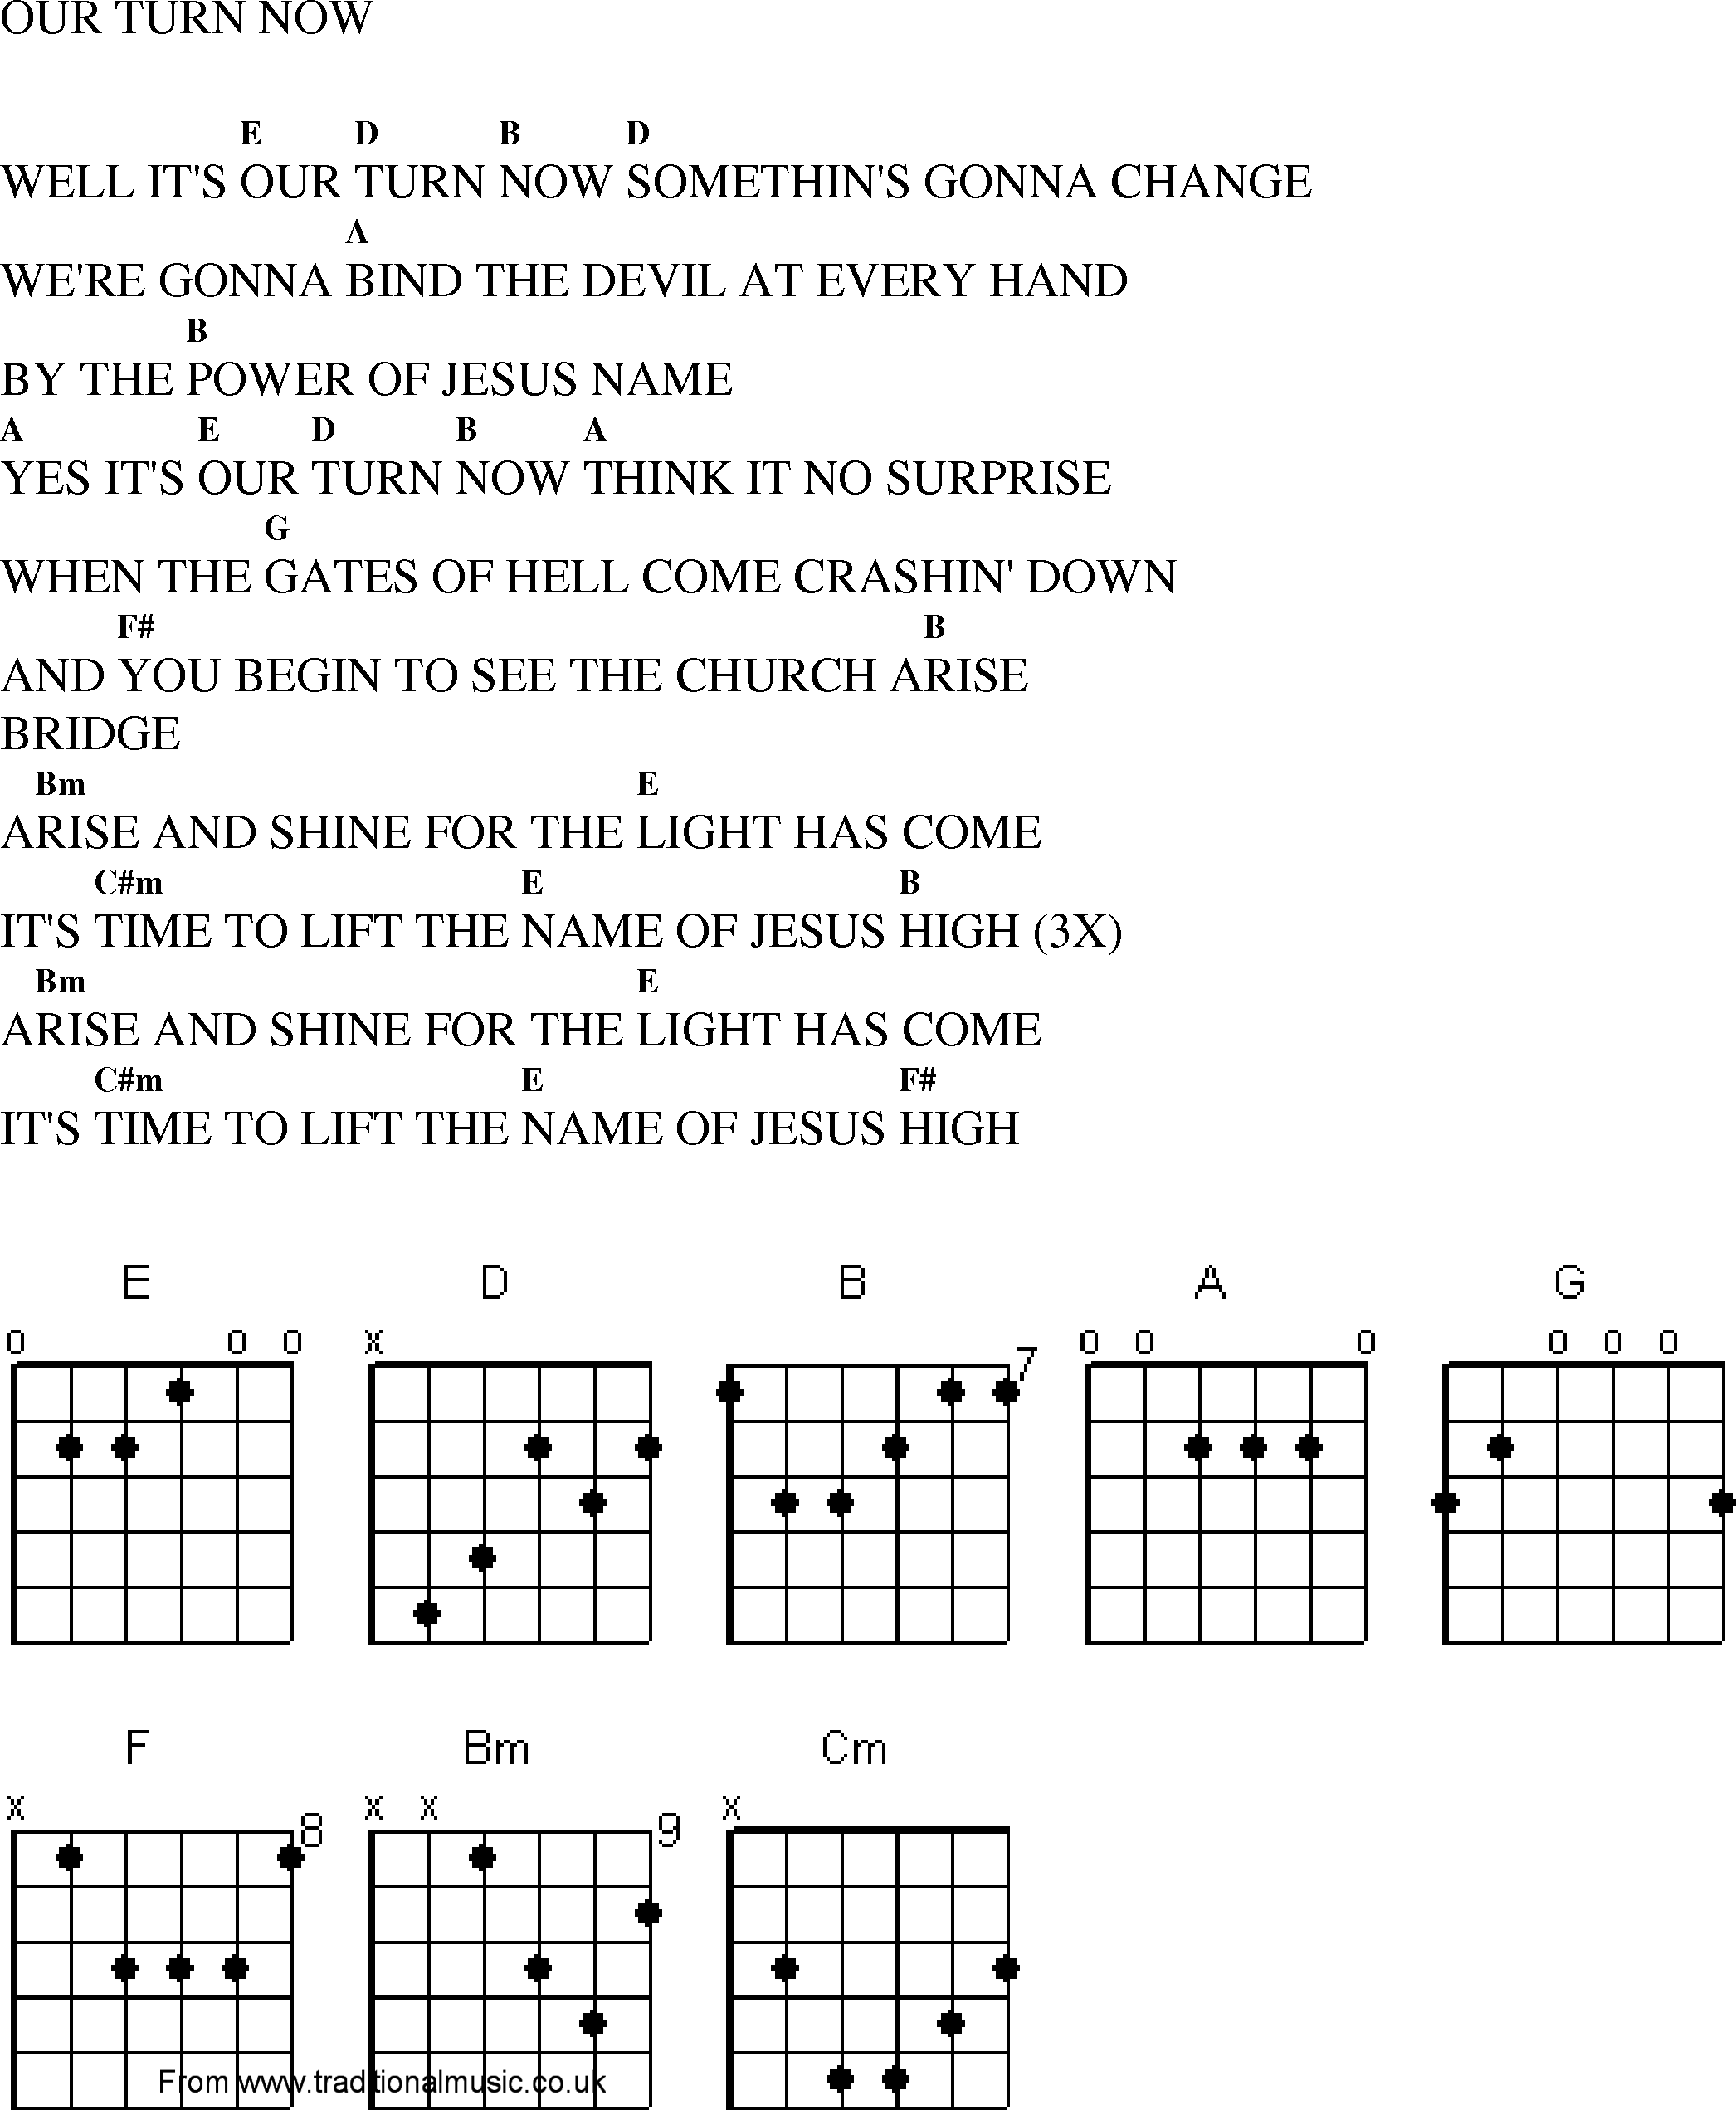 Gospel Song: our_turn_now, lyrics and chords.